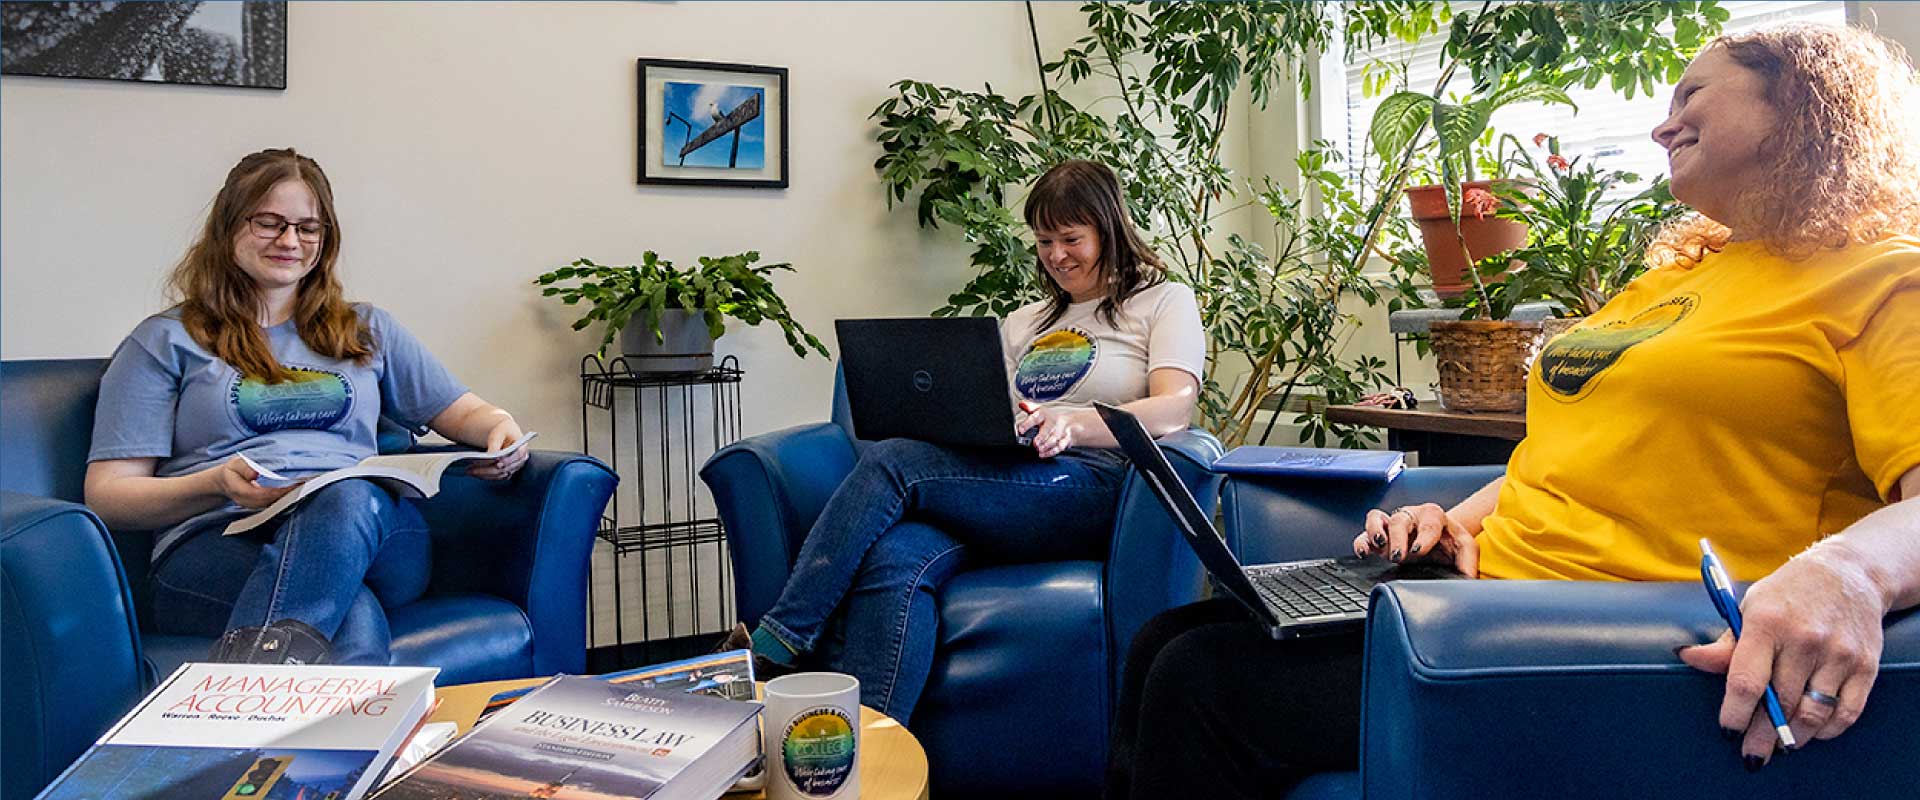 Students with laptops in a study lounge